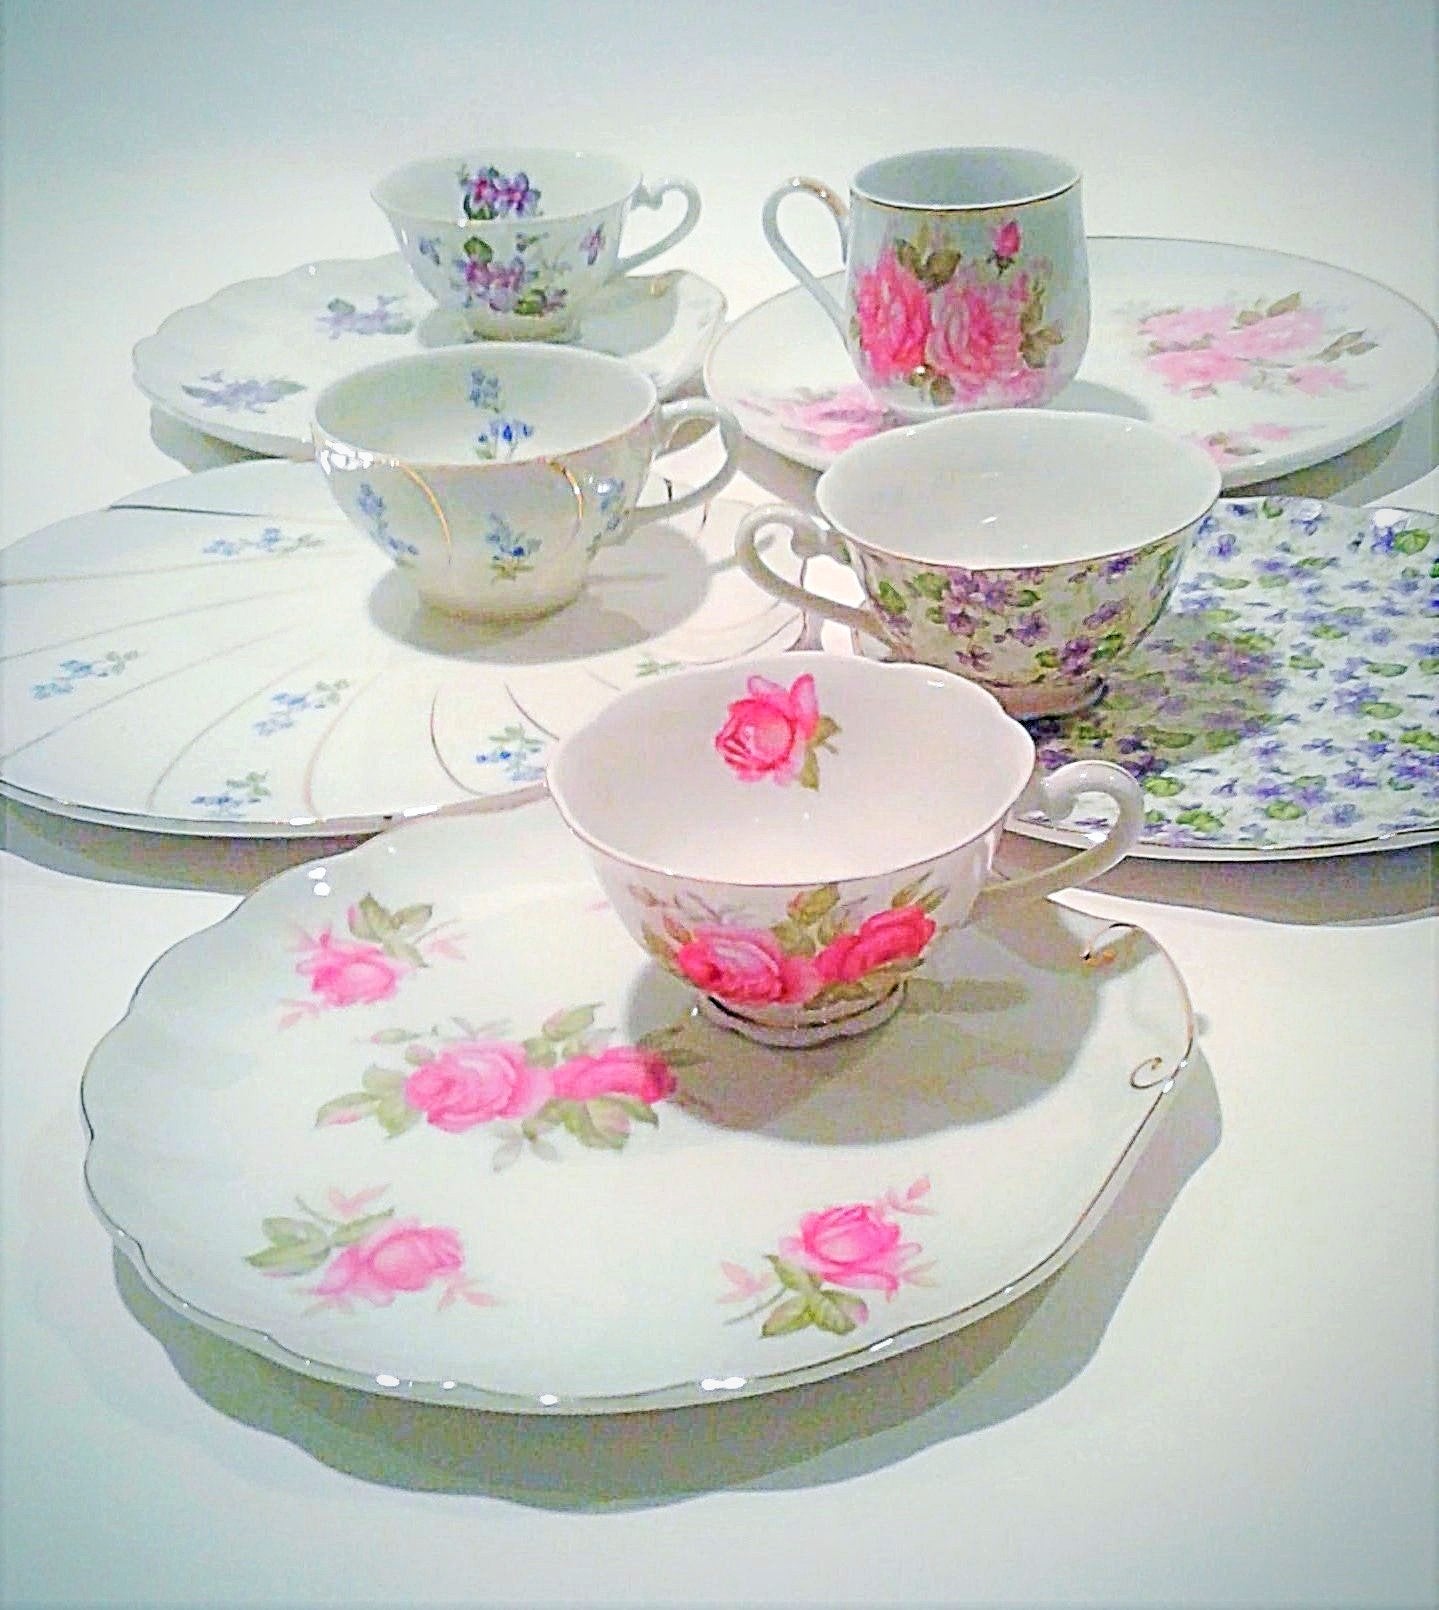 Snack Plate with Teacup Set